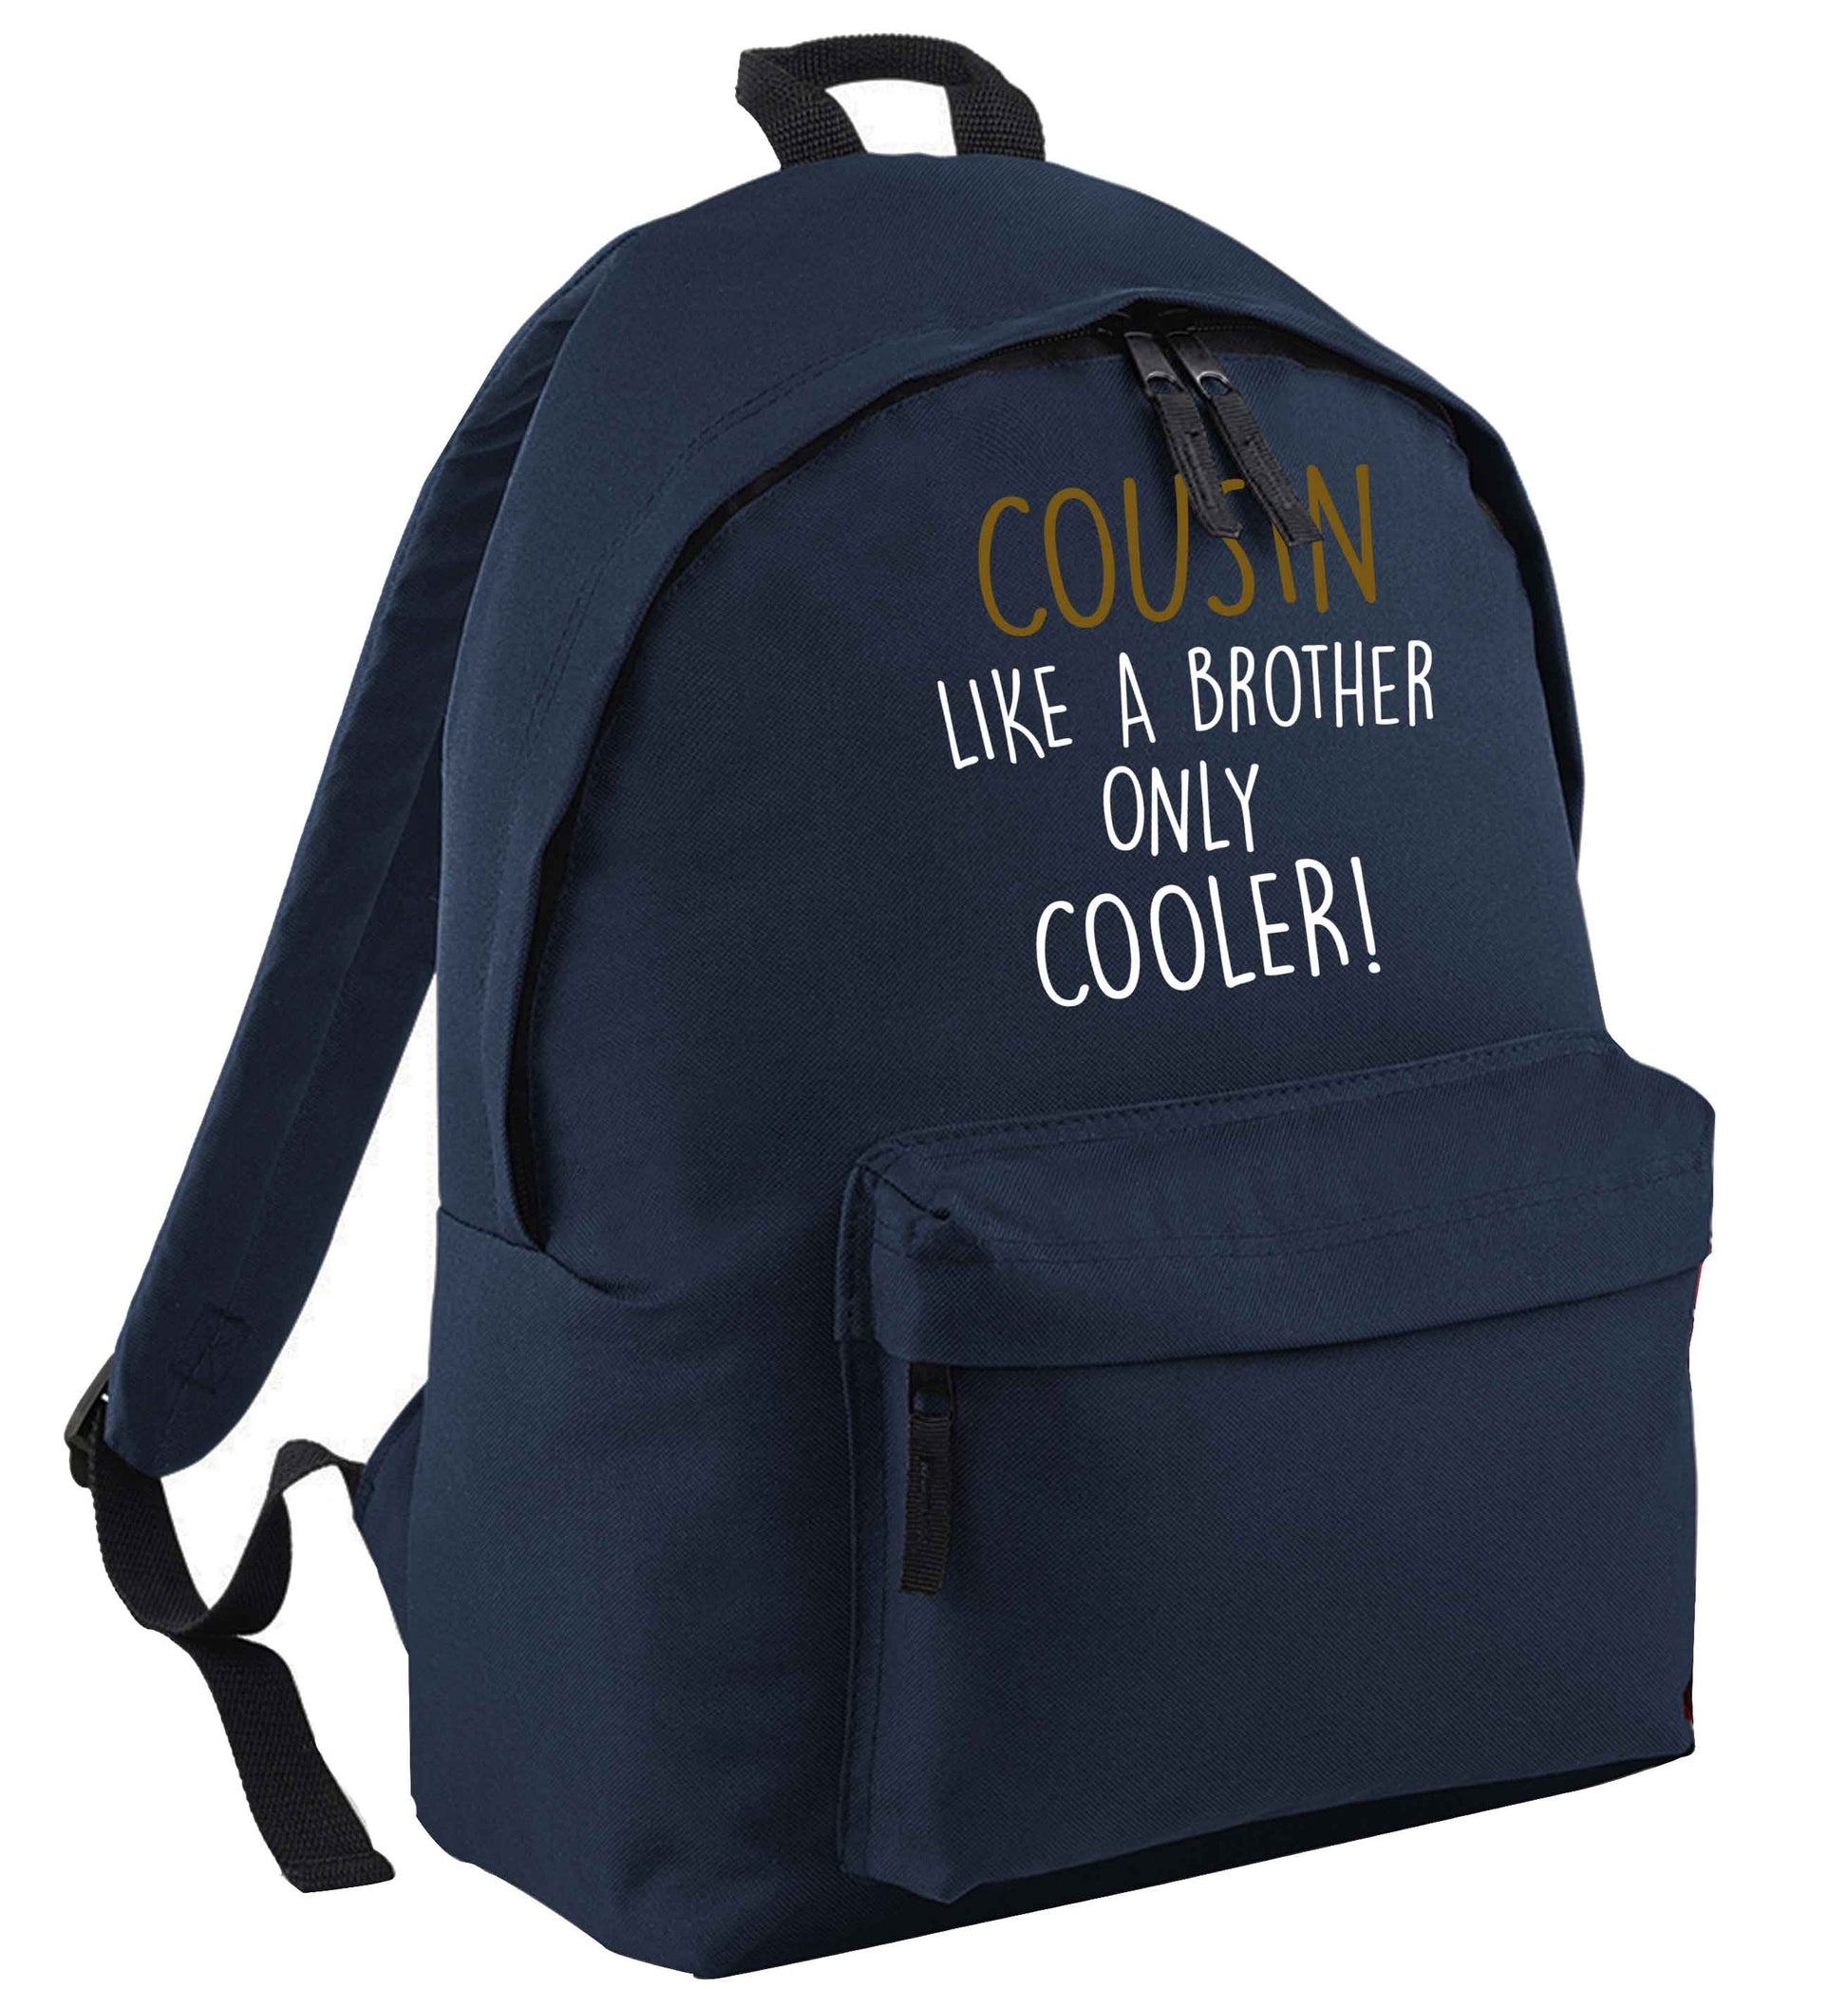 Cousin like a brother only cooler navy adults backpack